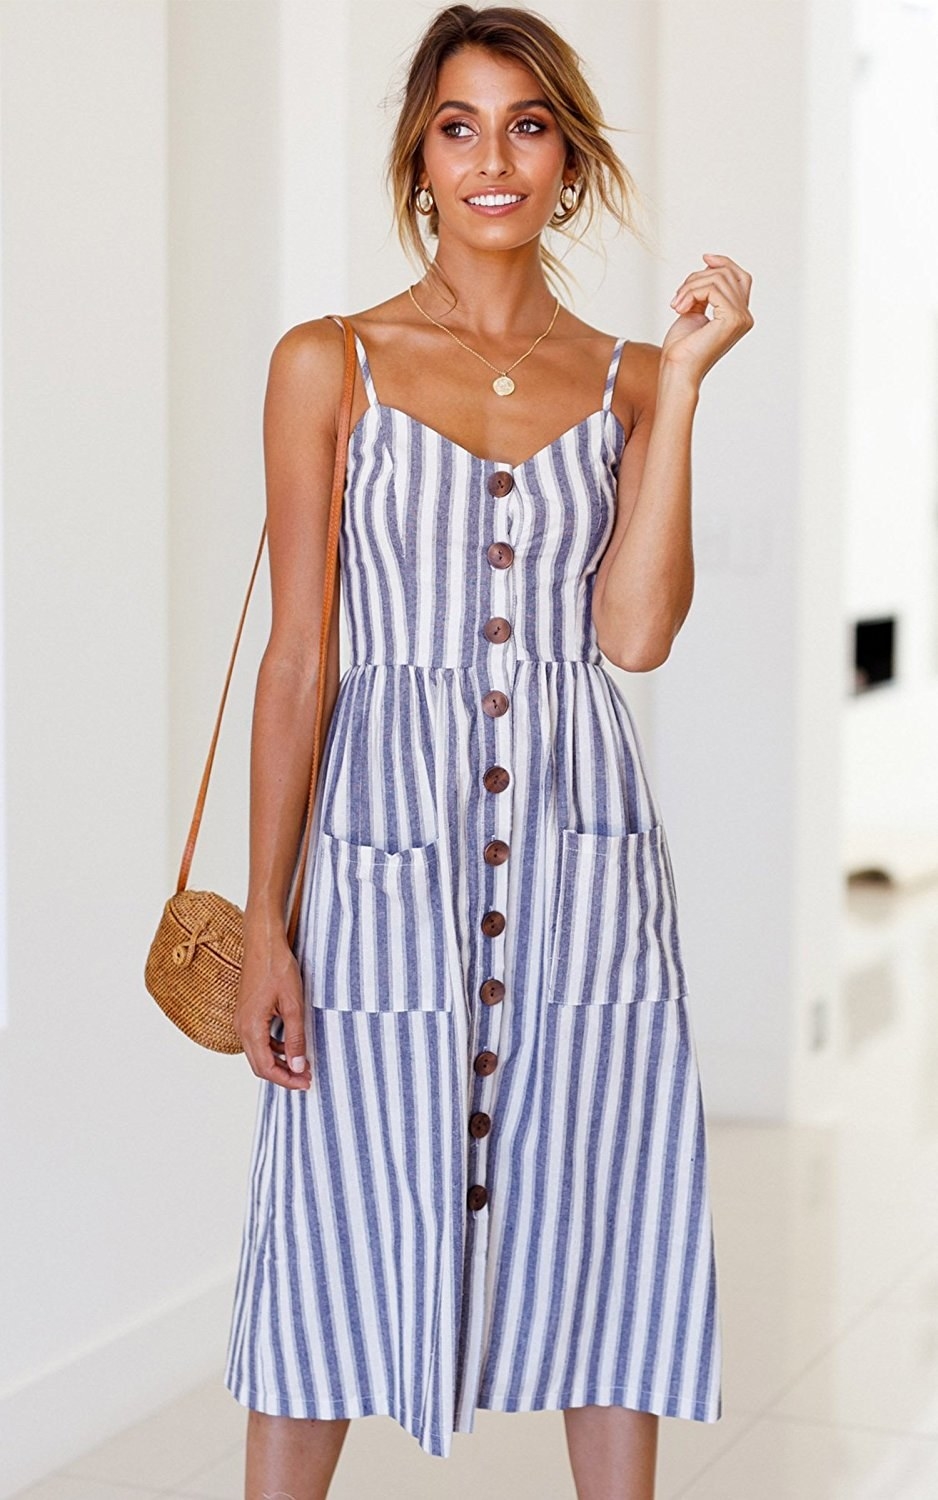 37 Cute And Comfy Dresses To Help You Get Through The Week